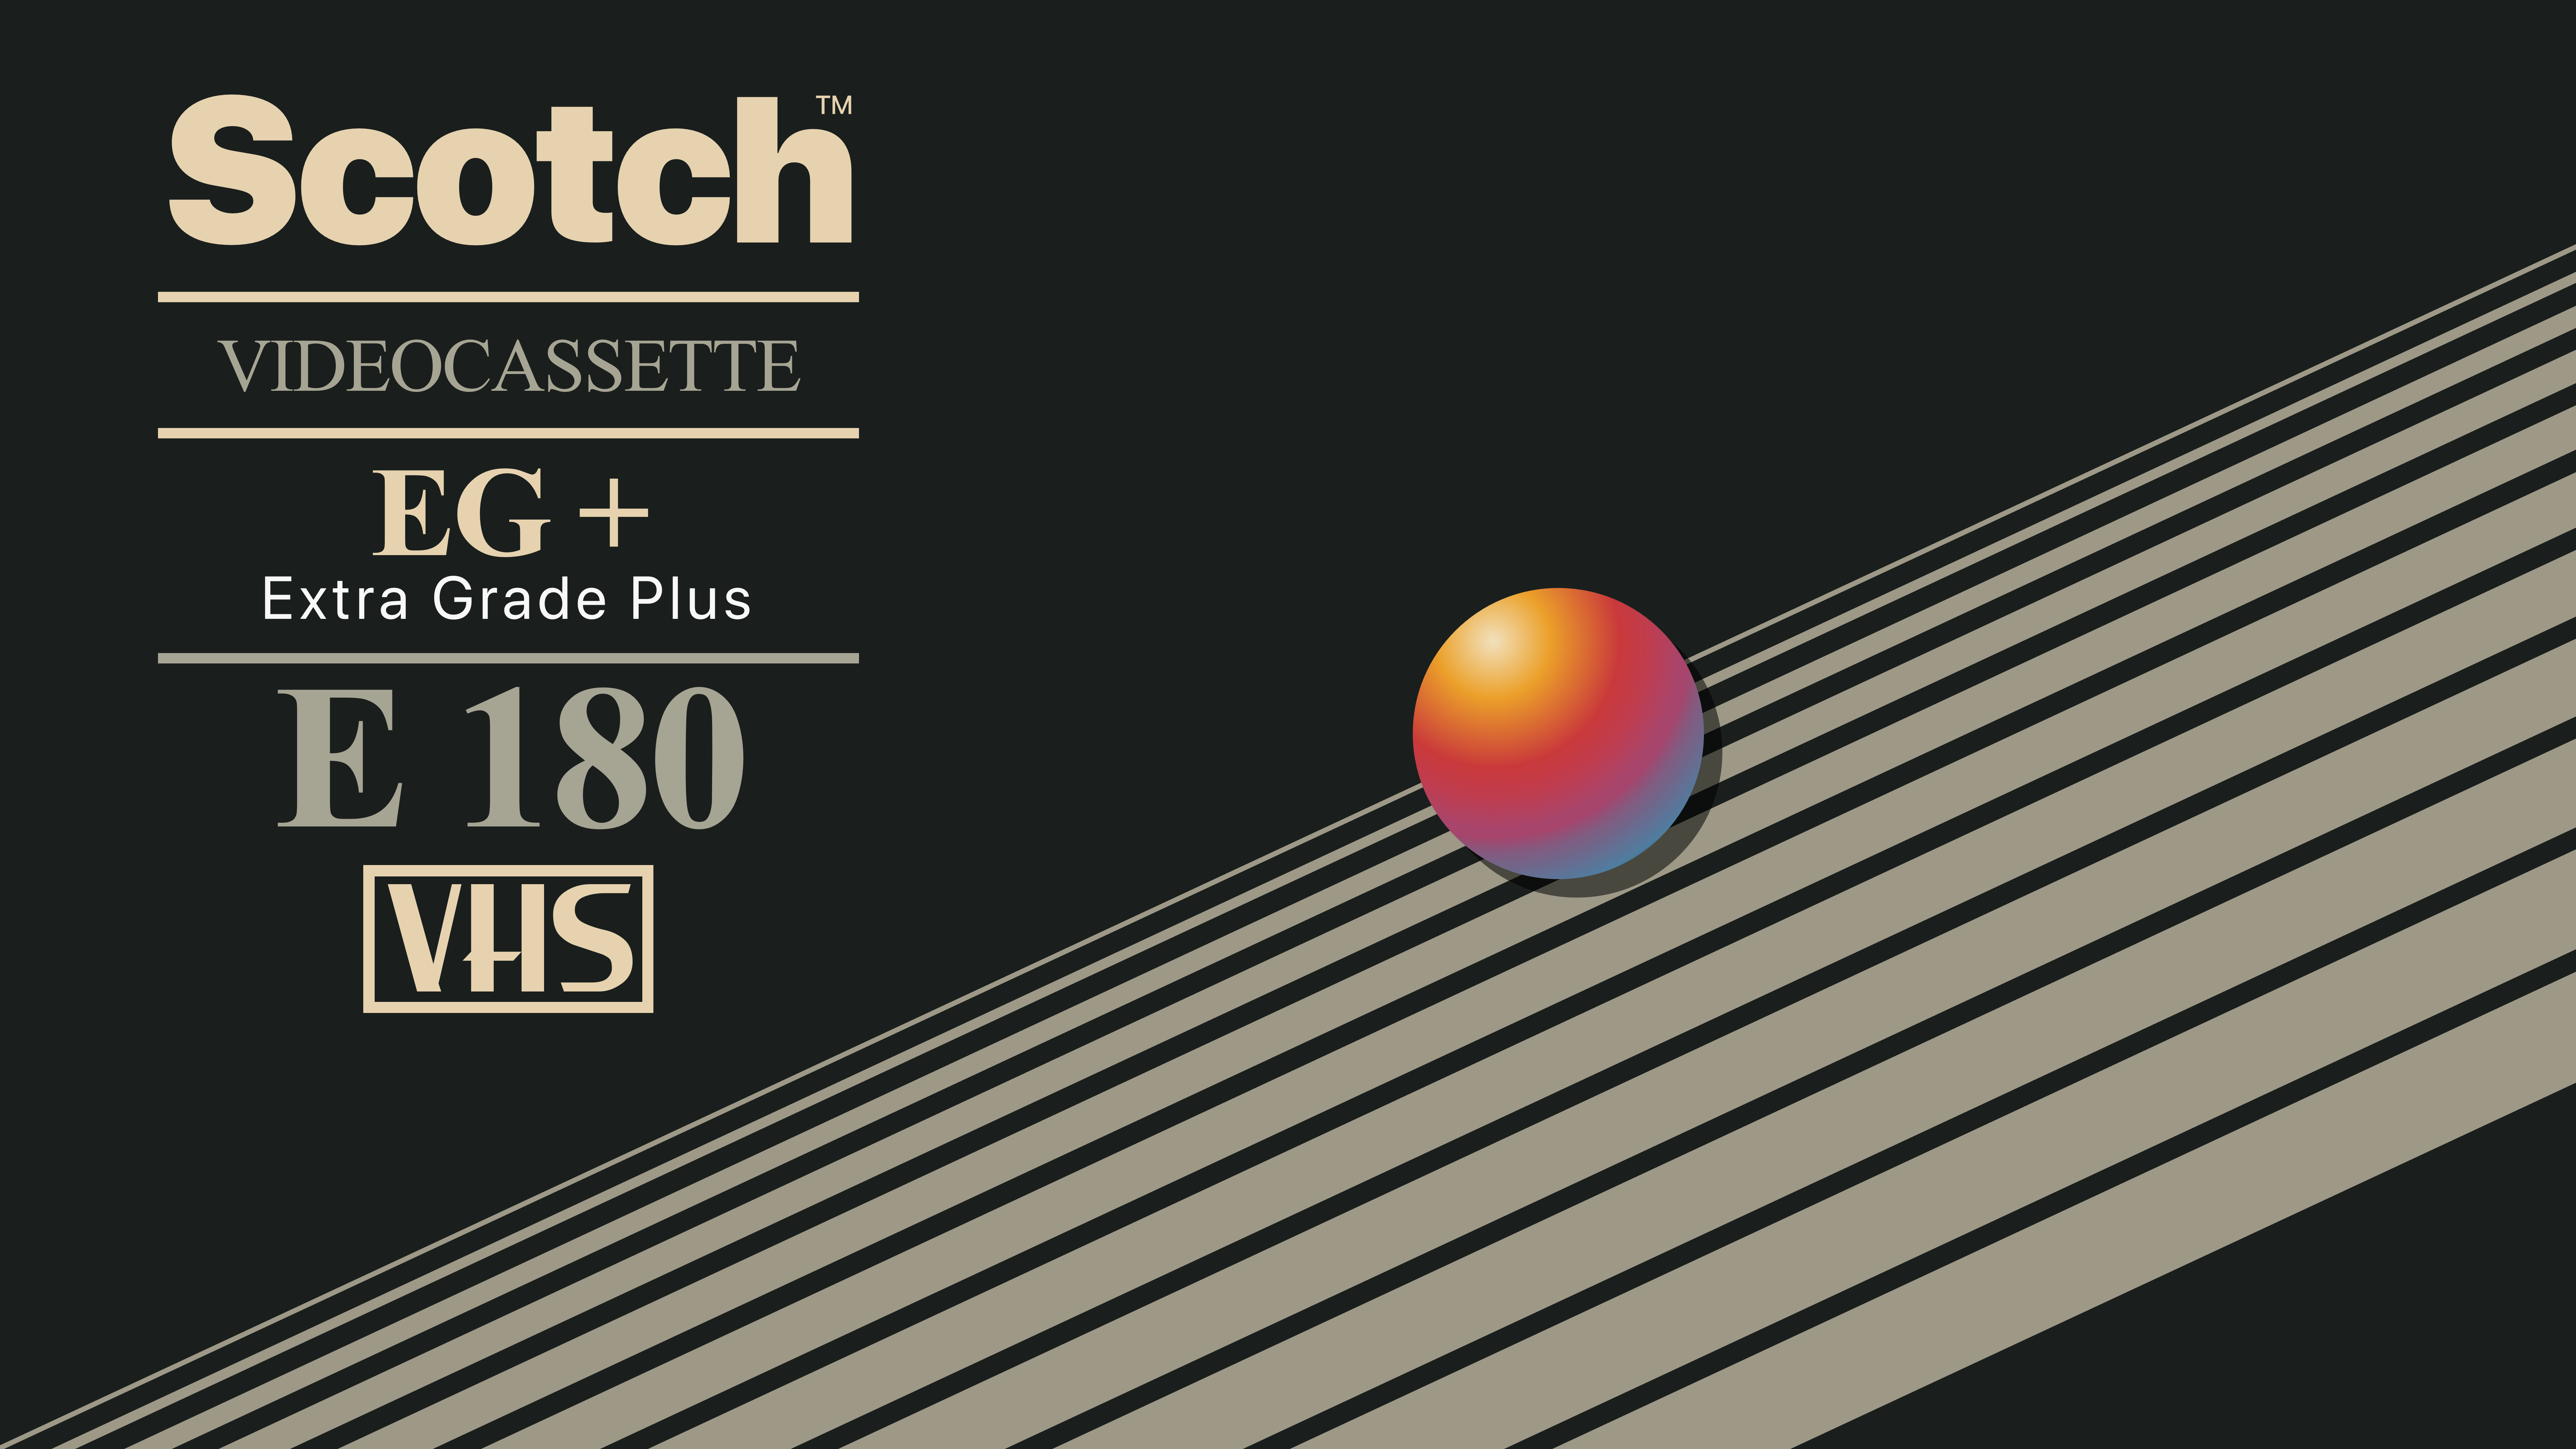 Found An Old VHS Tape In My Garage, So It Inspired Me To Create Some 16:9 VHS Inspired 8K Wallpaper [7680x4320] [Album In The Comments, Plus Aspect Ratio For Macbook Pros]